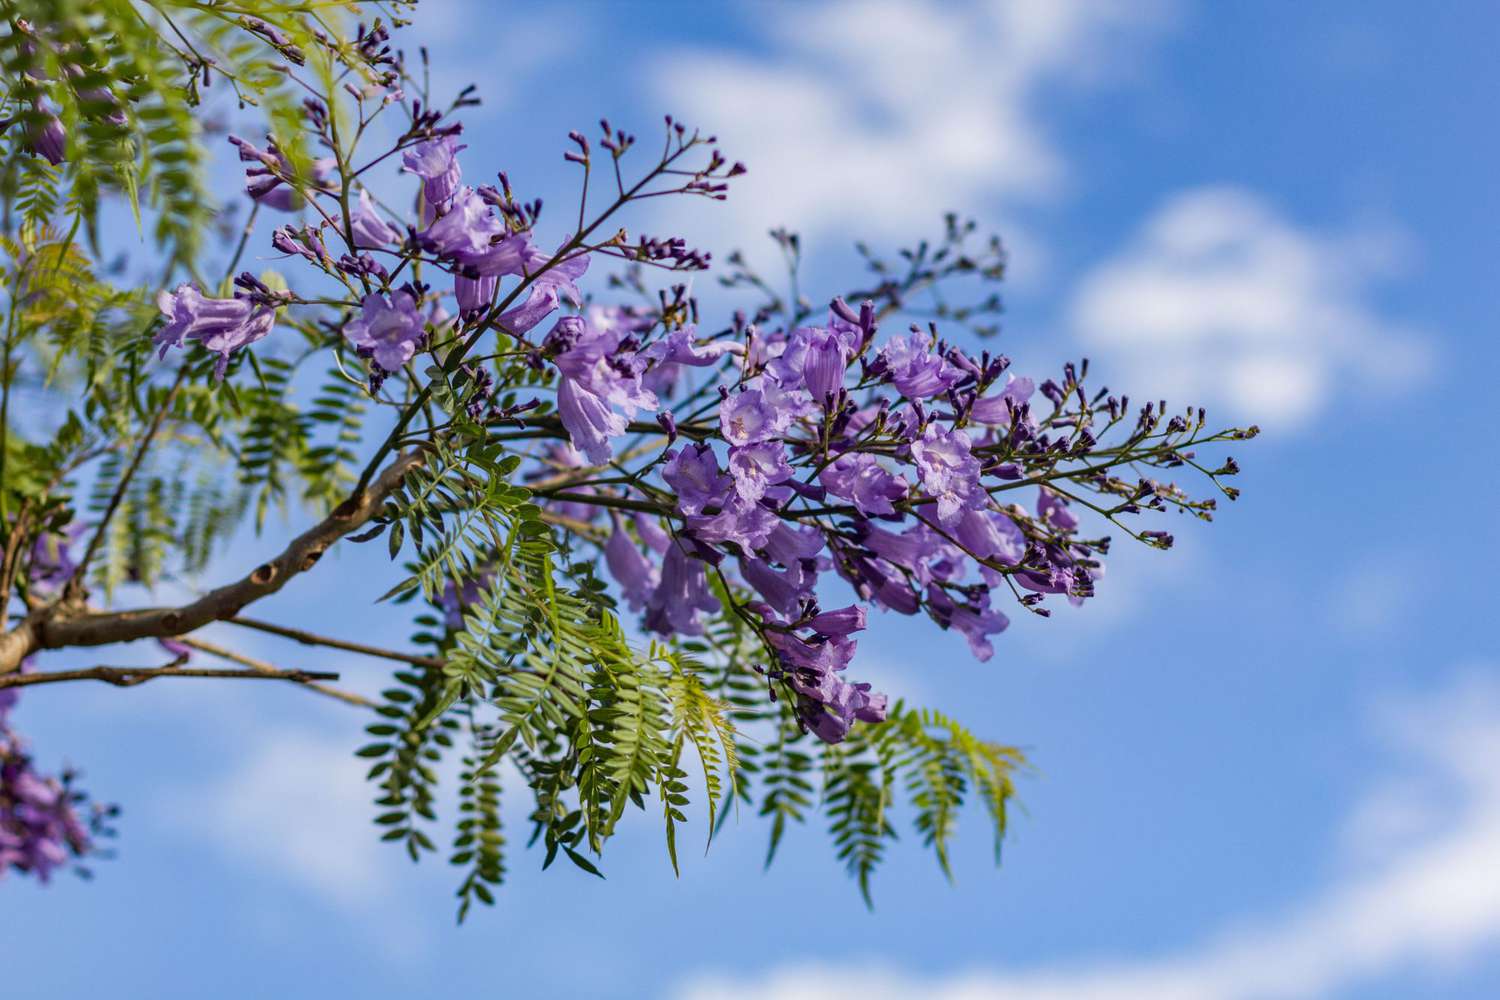 Debate on Climate Change in Mexico Ignited by Early Jacaranda Bloom